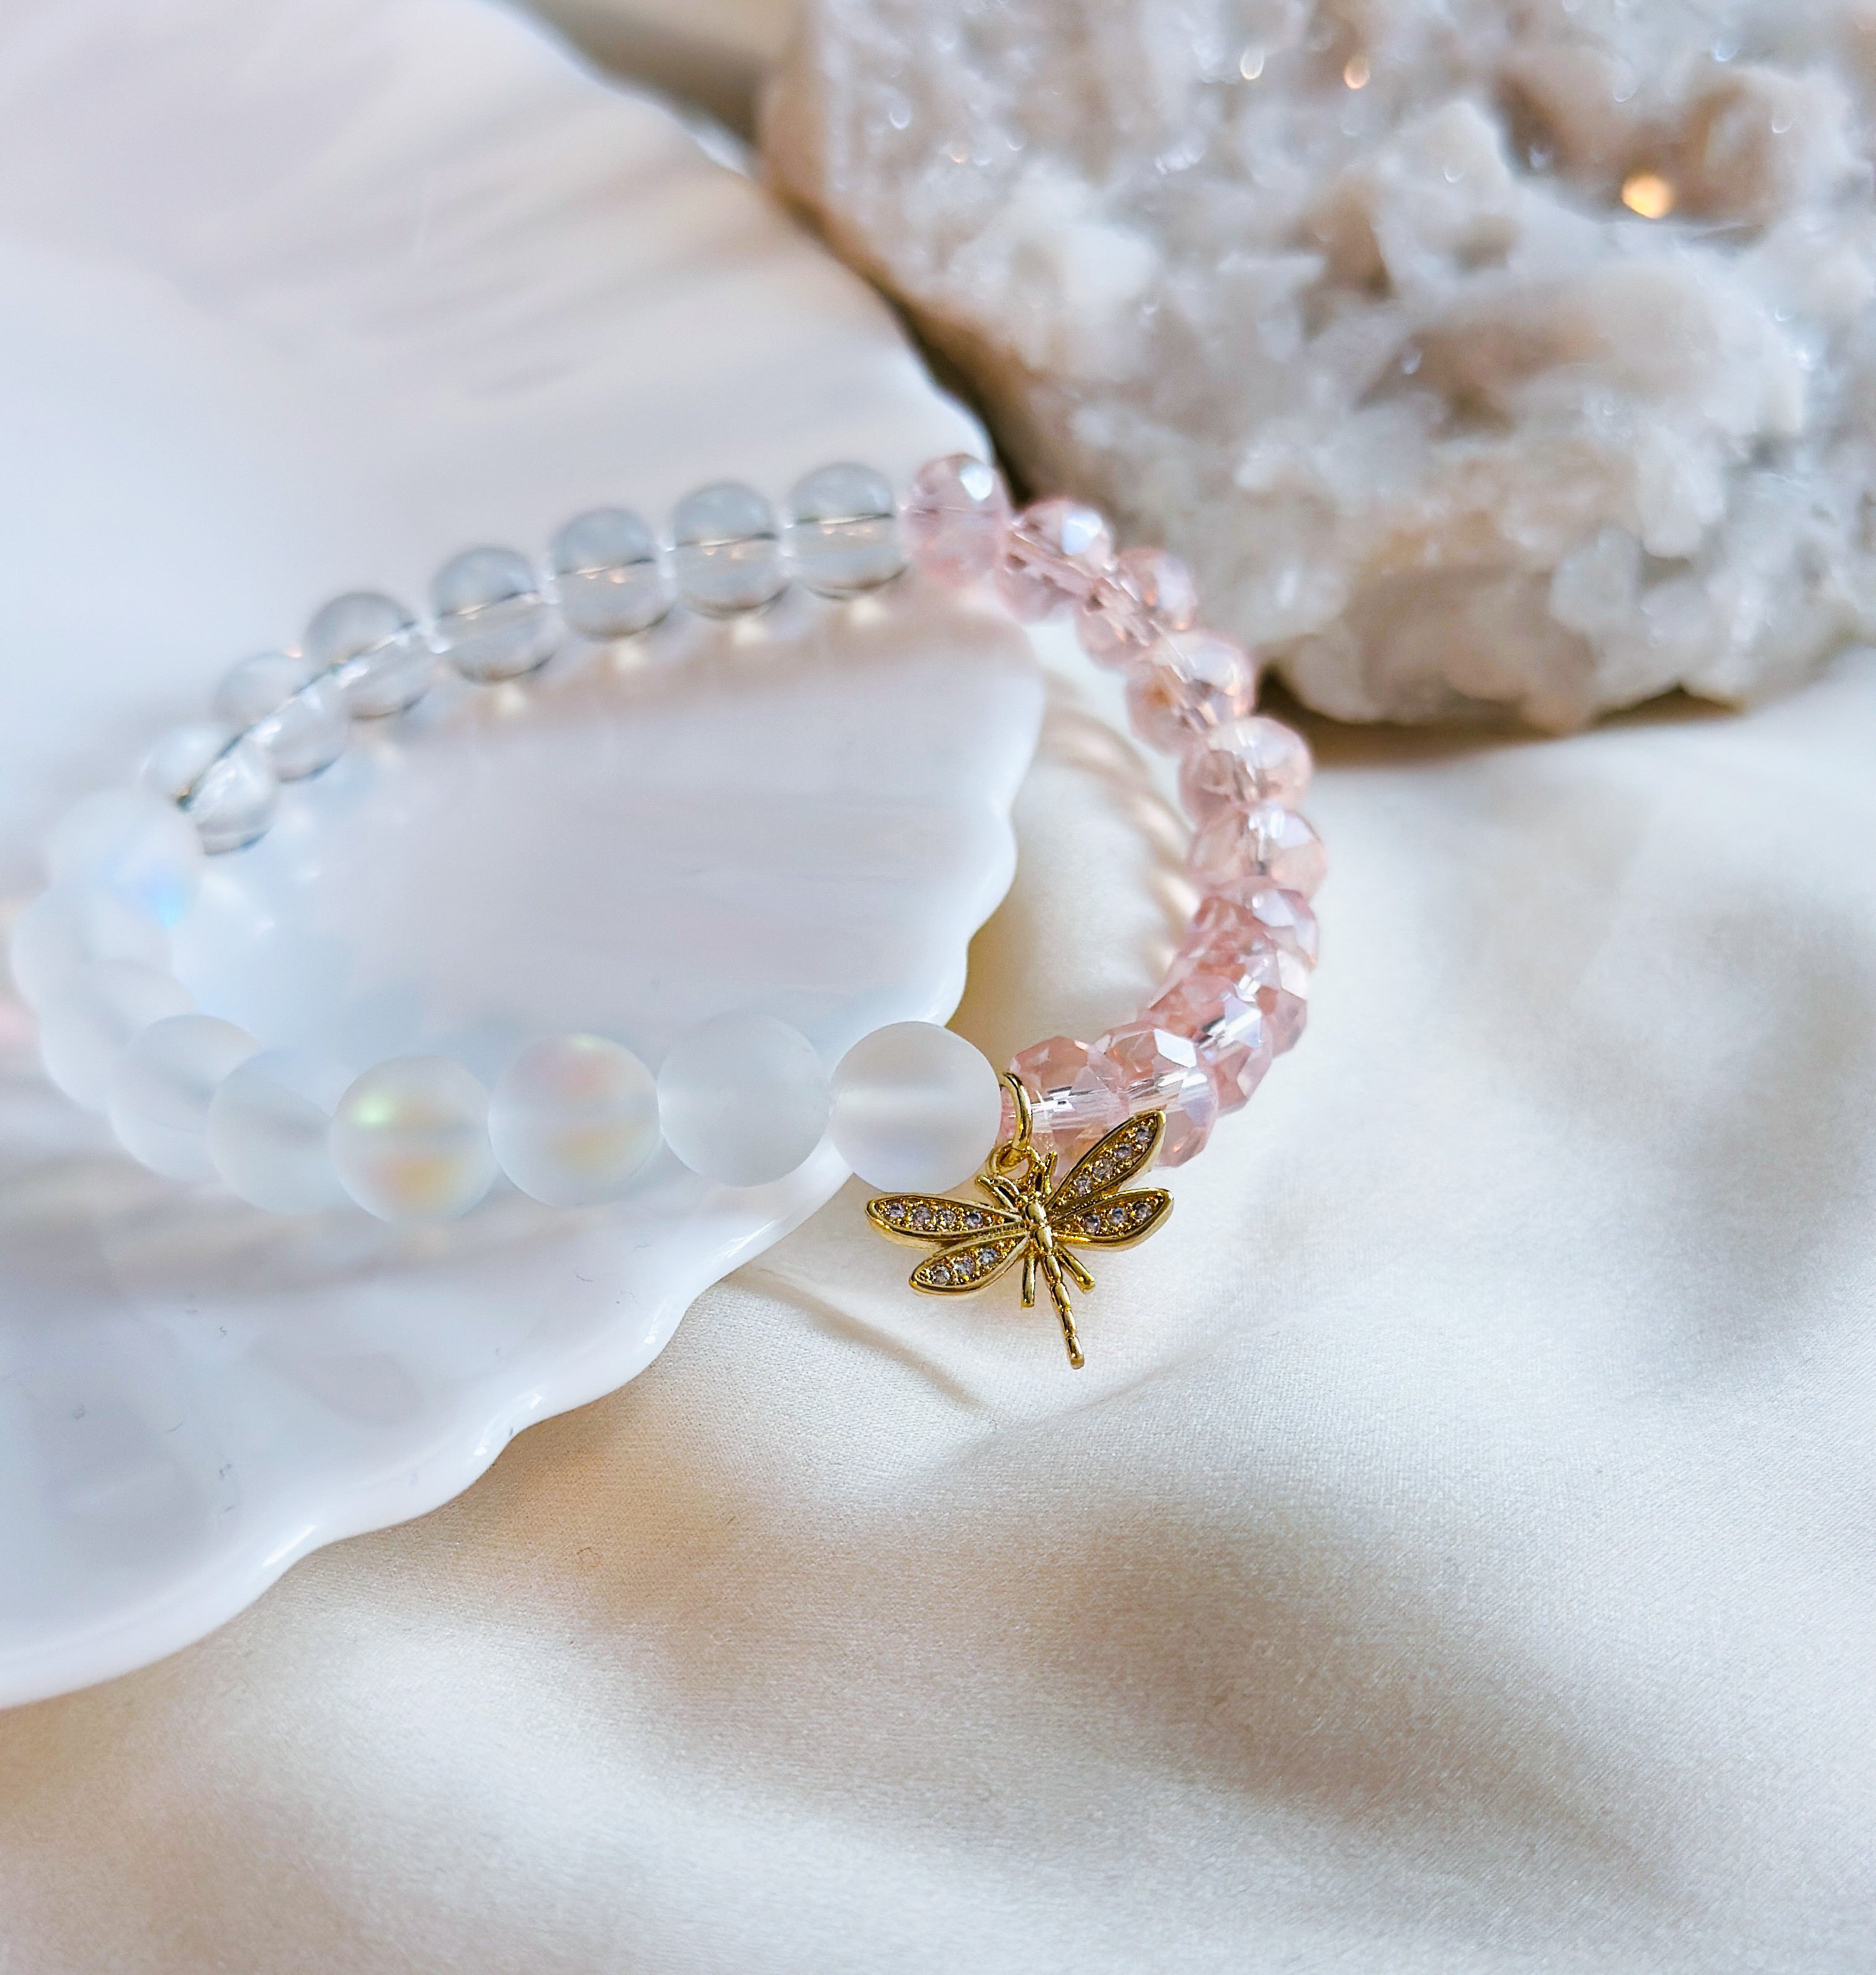 New collection called The Glam Collection healing gemstone bracelets image shown Dreamy Dragonfly bracelet with Aura Quartz, clear quartz, pink glass beads and a gold dragonfly charm